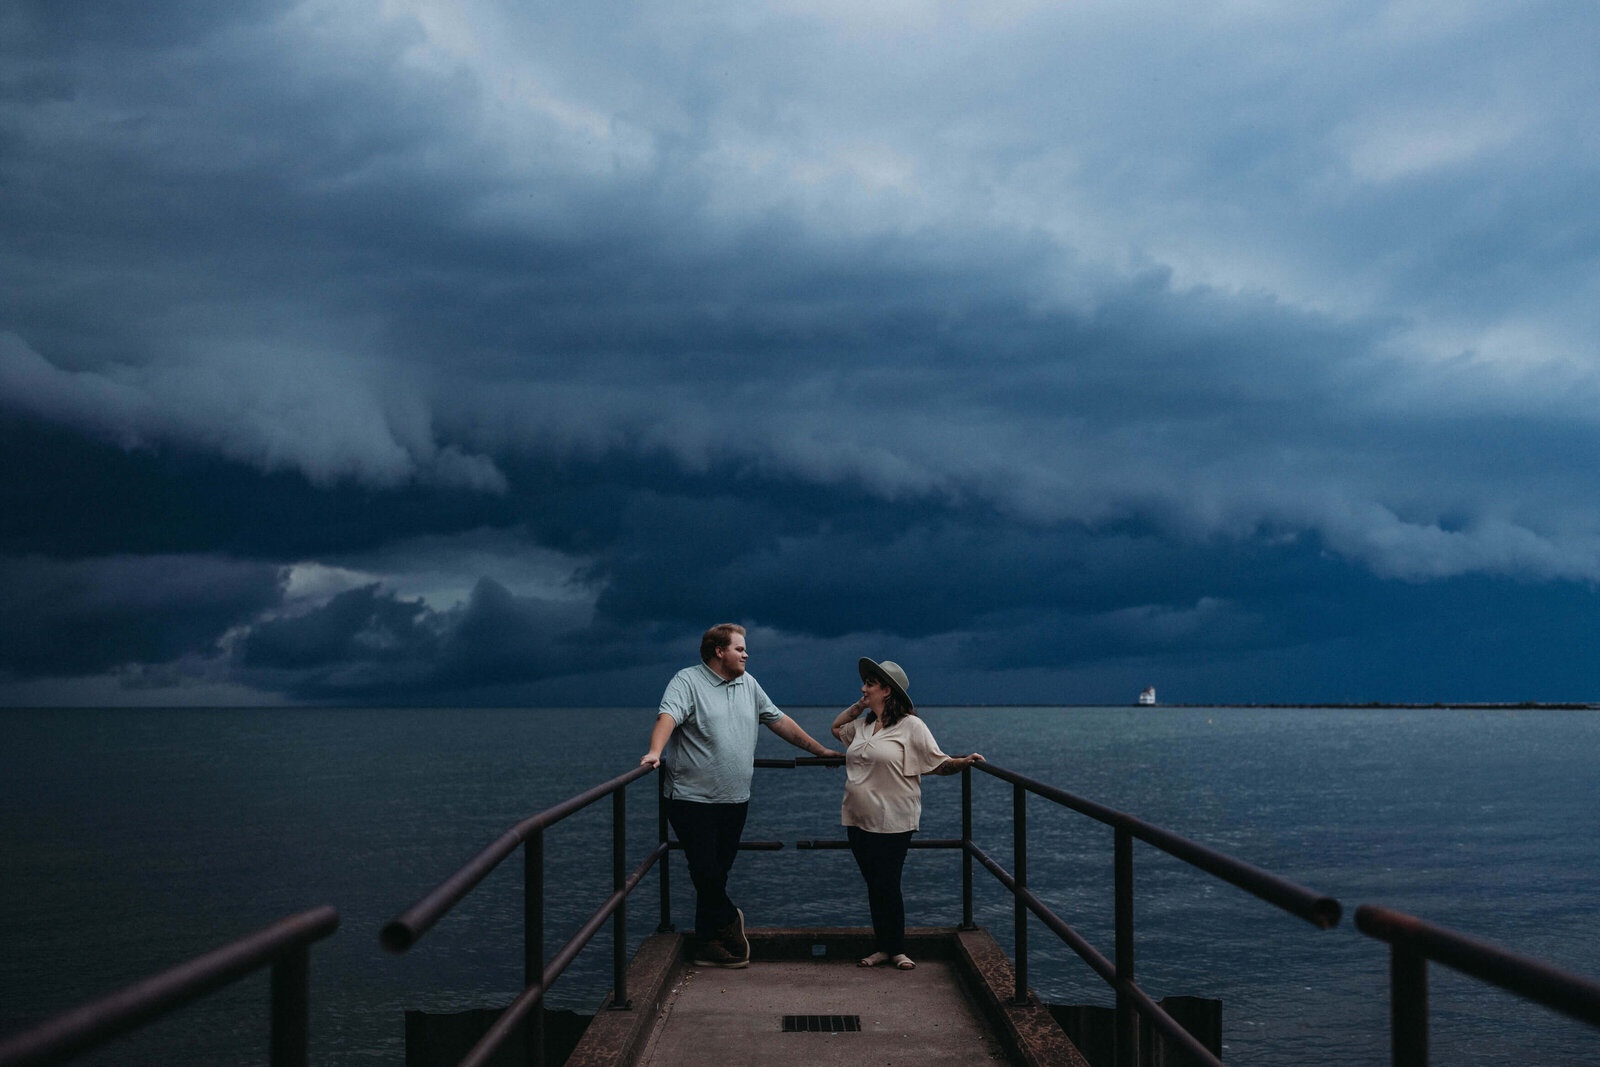 Partners pose at incoming storm in Cleveland, unique photo